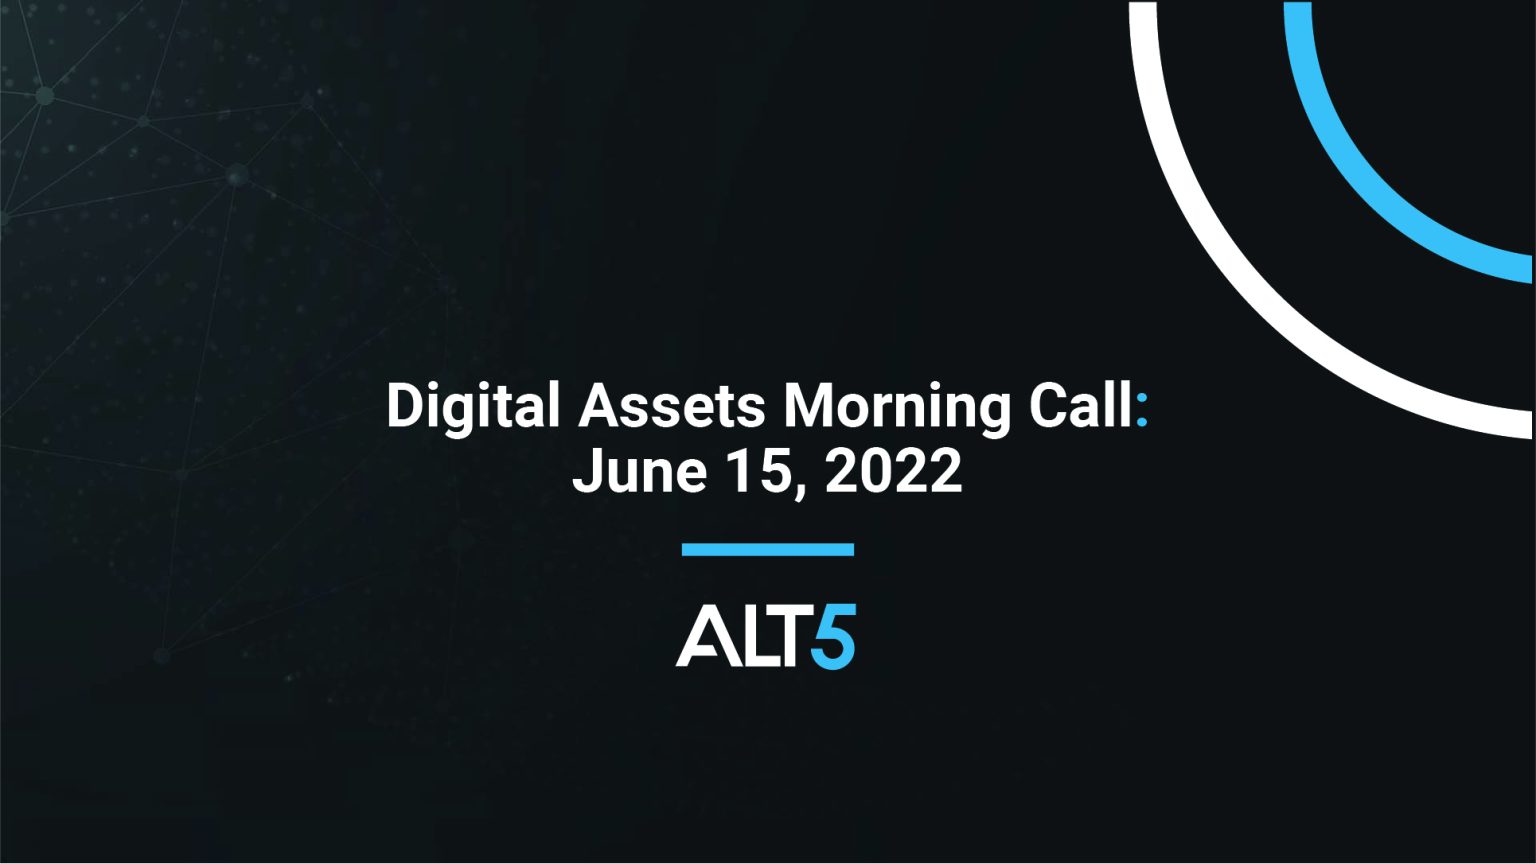 Digital Assets Morning Call: June 15 2022 - Major crypto token prices remain under pressure